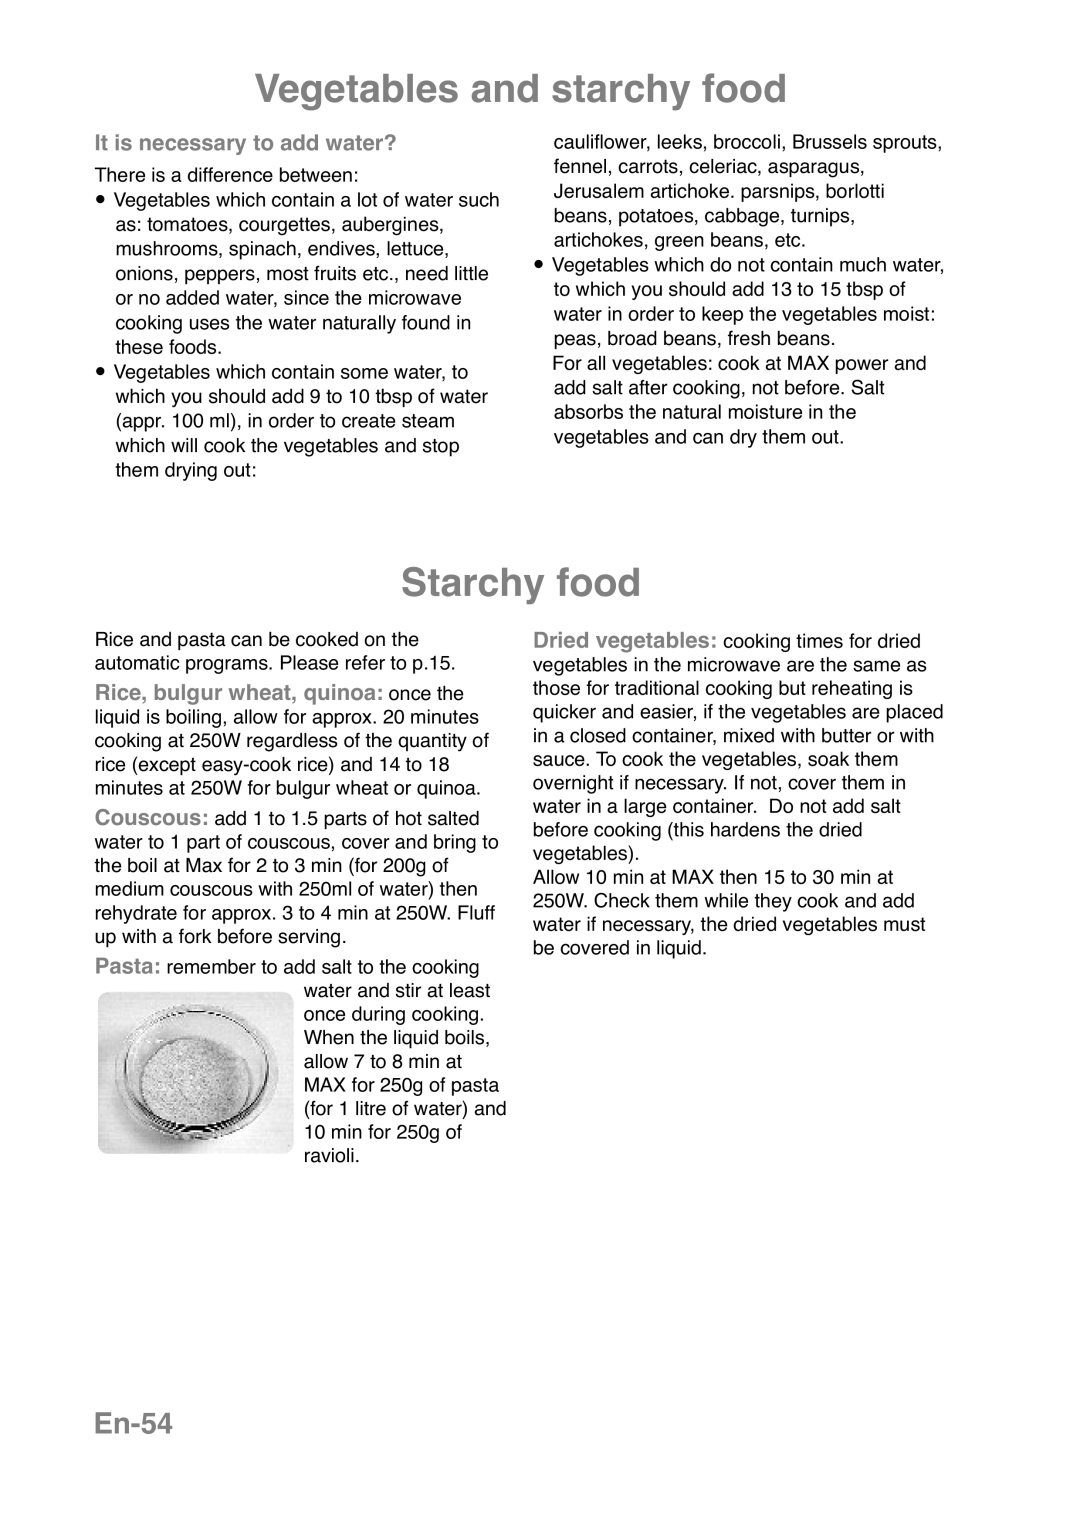 Panasonic NN-CT569M, NN-CT559W manual Vegetables and starchy food, Starchy food, En-54, It is necessary to add water? 